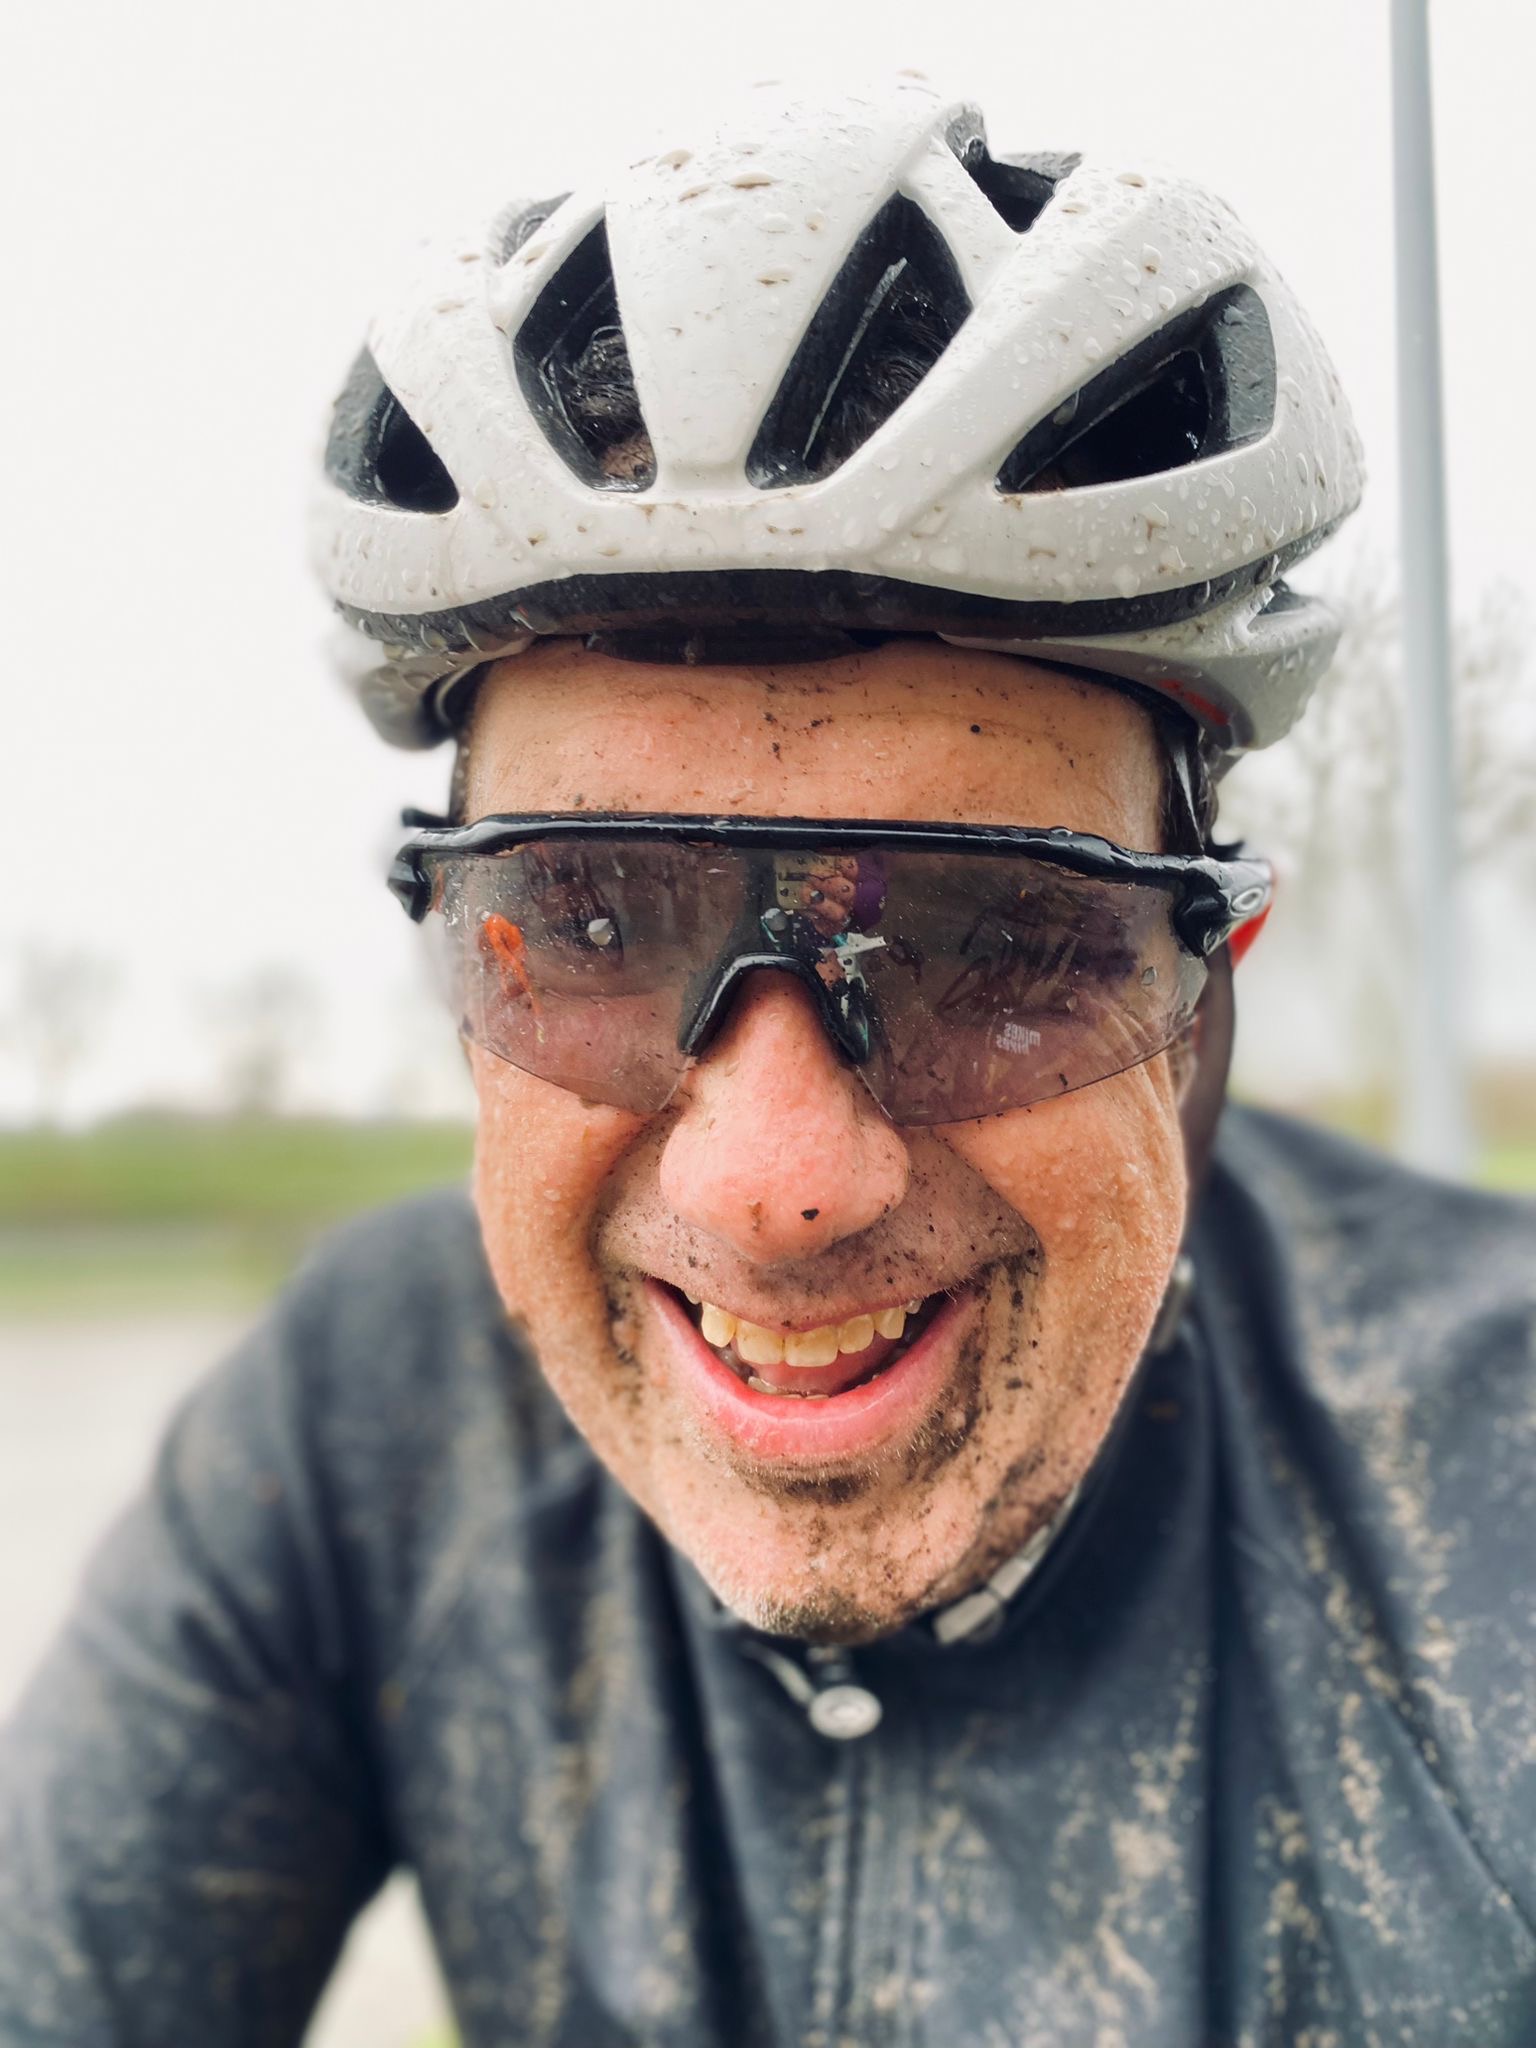 A portrait of Joey D'Antoni, face spackled with mud and dirt from riding in the rain